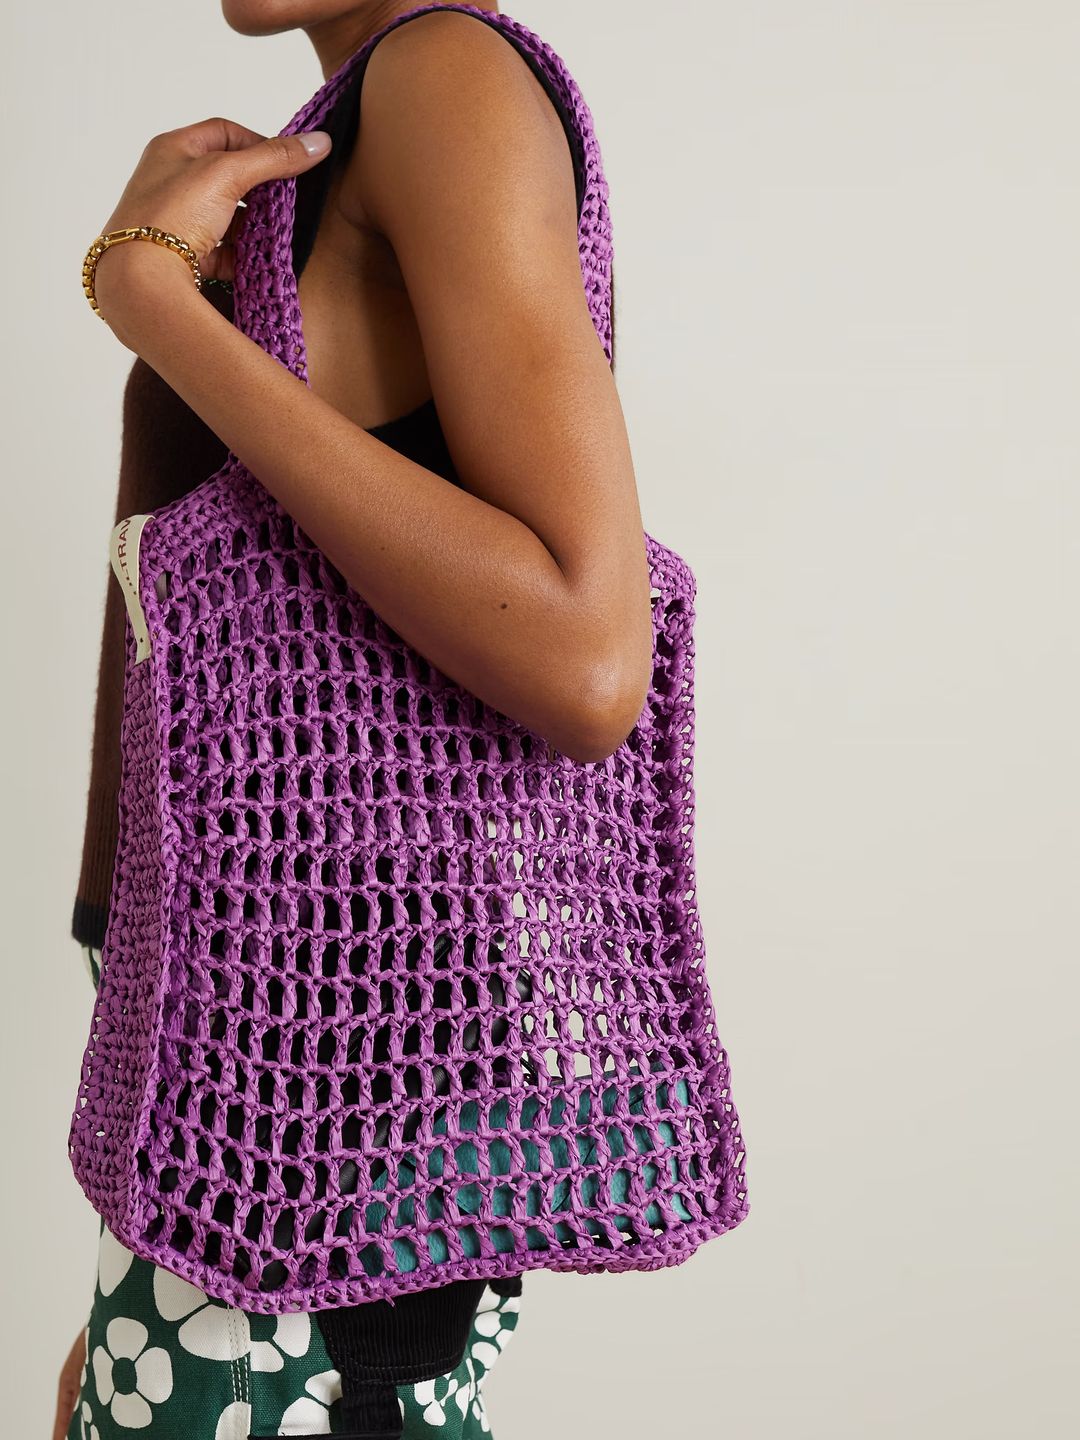 Crocheted Tote - Ultraviolhat